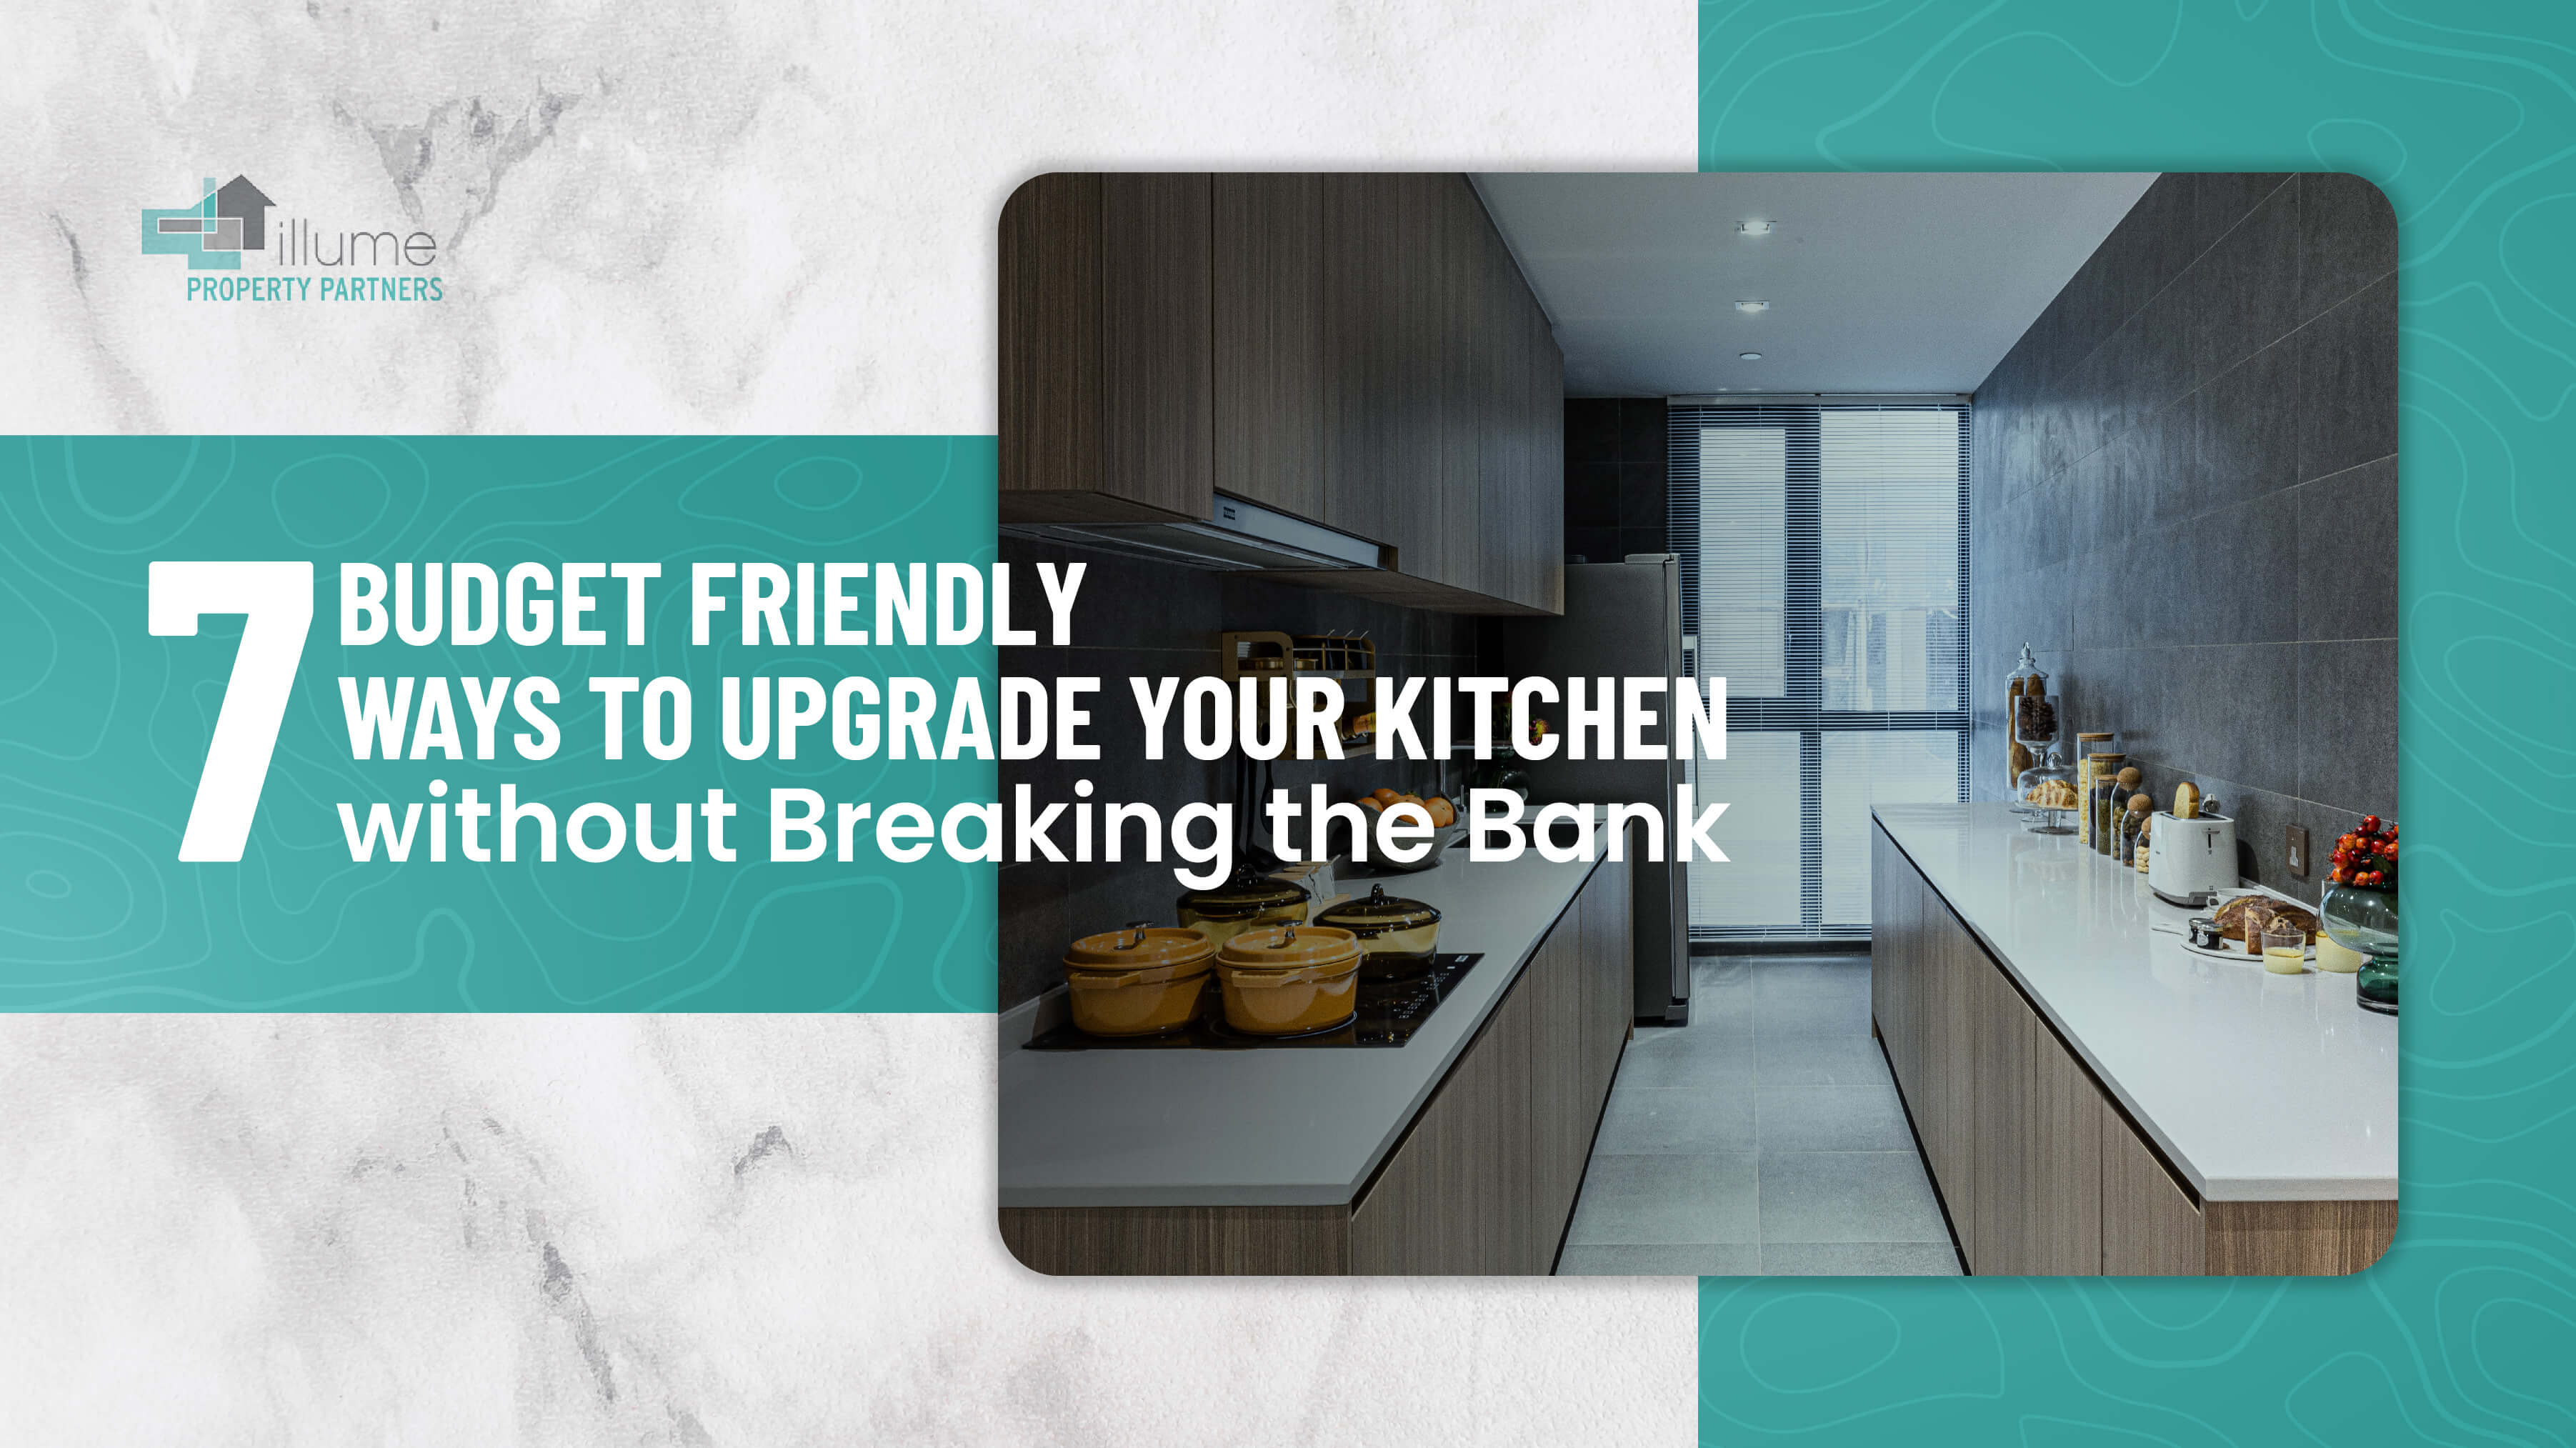 7 Budget Ways to Upgrade Your Kitchen Without Breaking the Bank